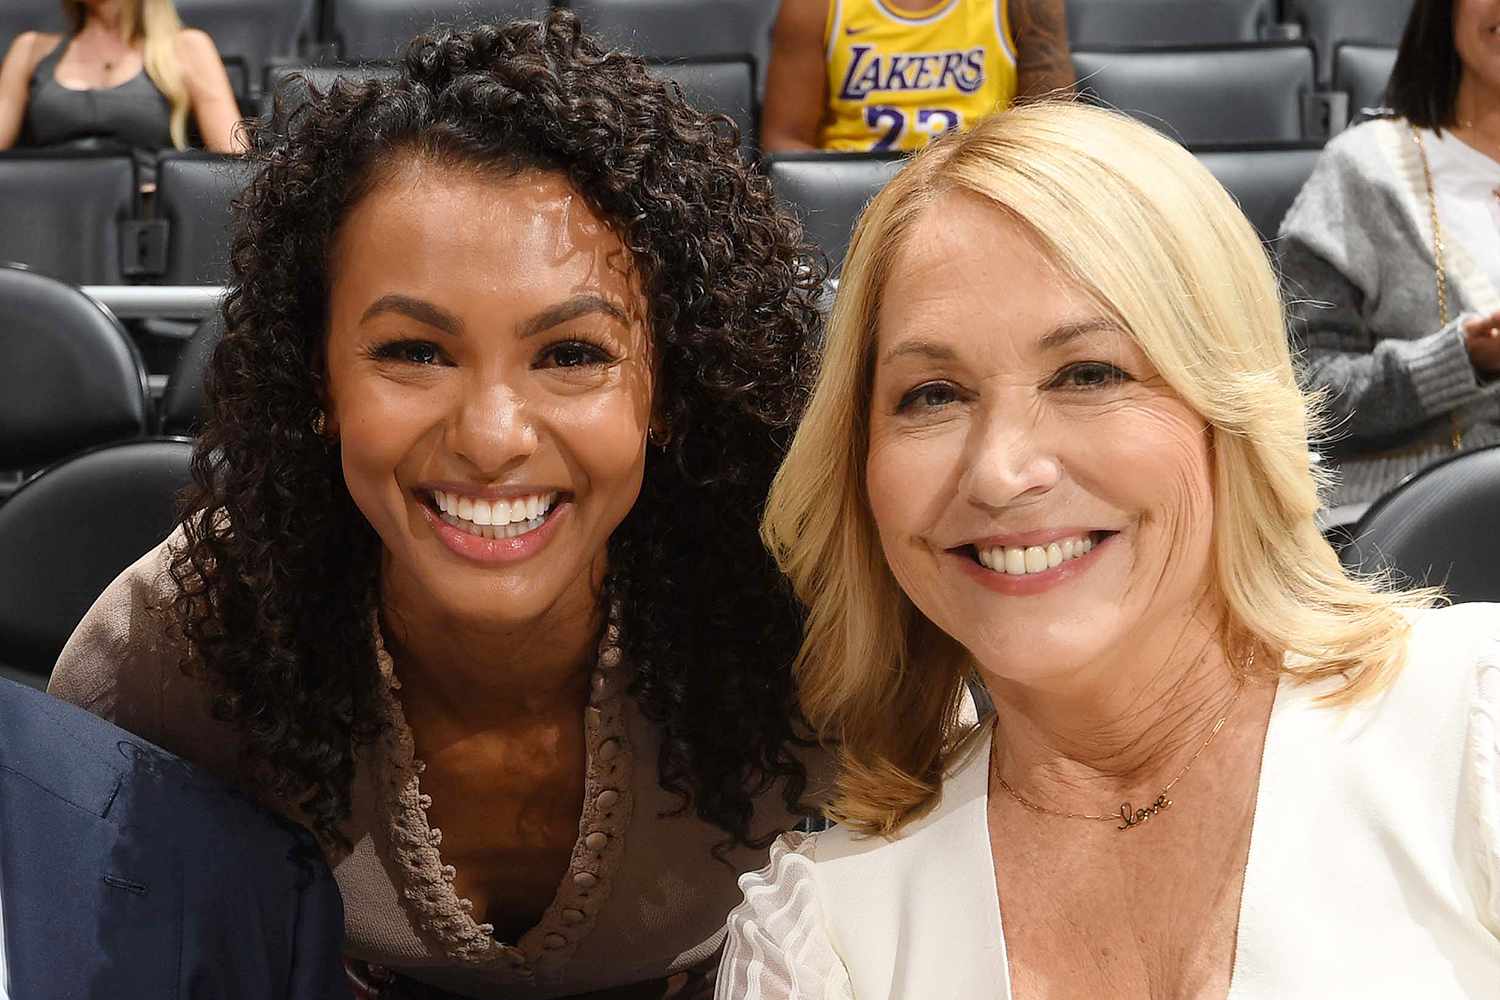 Doc Rivers, Doris Burke, and Malika Andrews talk before the game between the Golden State Warriors and the Los Angeles Lakers on October 13, 2023 at Crypto.Com Arena in Los Angeles